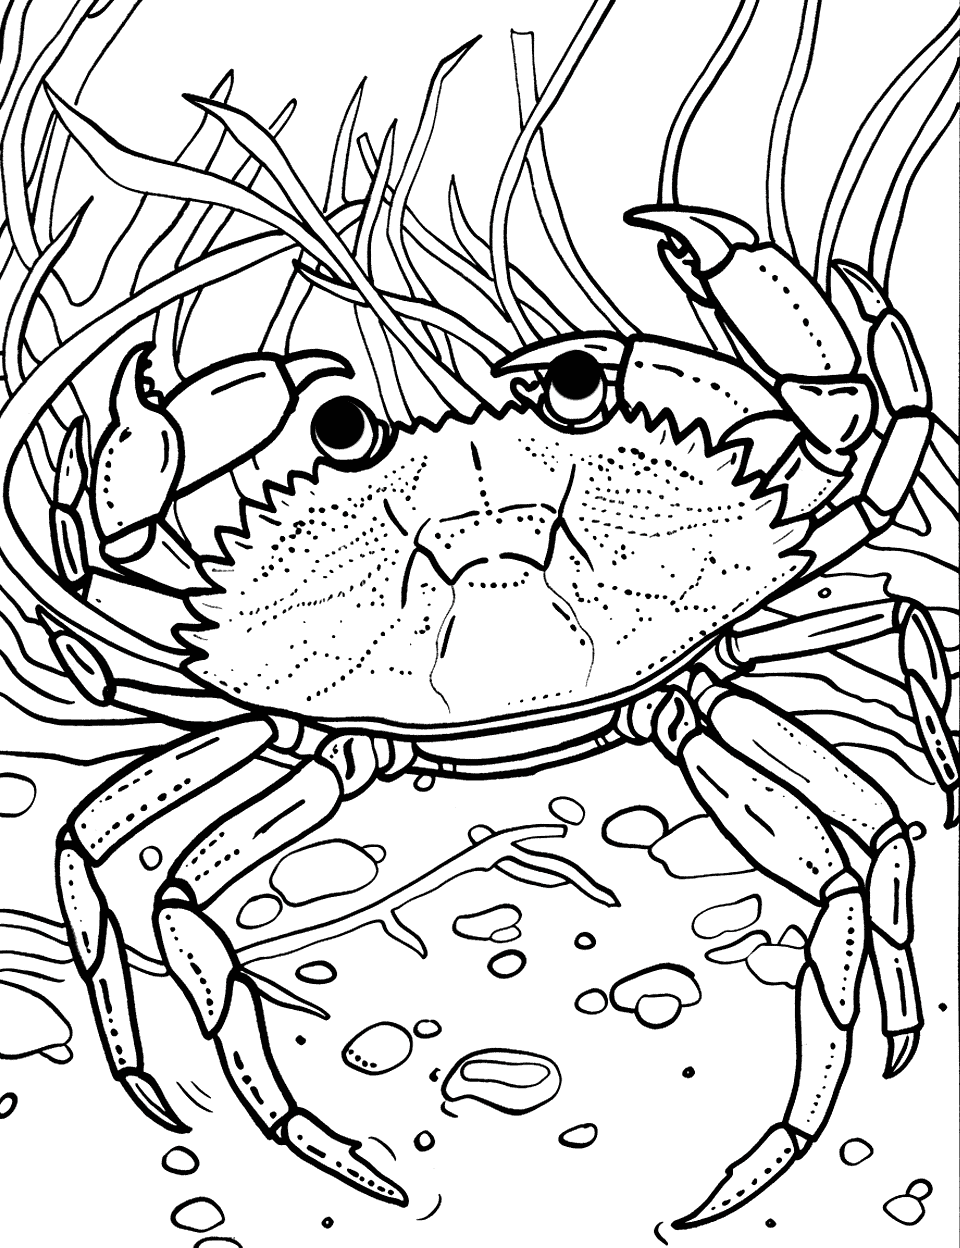 Hidden Crab in Seaweed Coloring Page - A small crab camouflaged among seaweed at the high tide line on the beach.